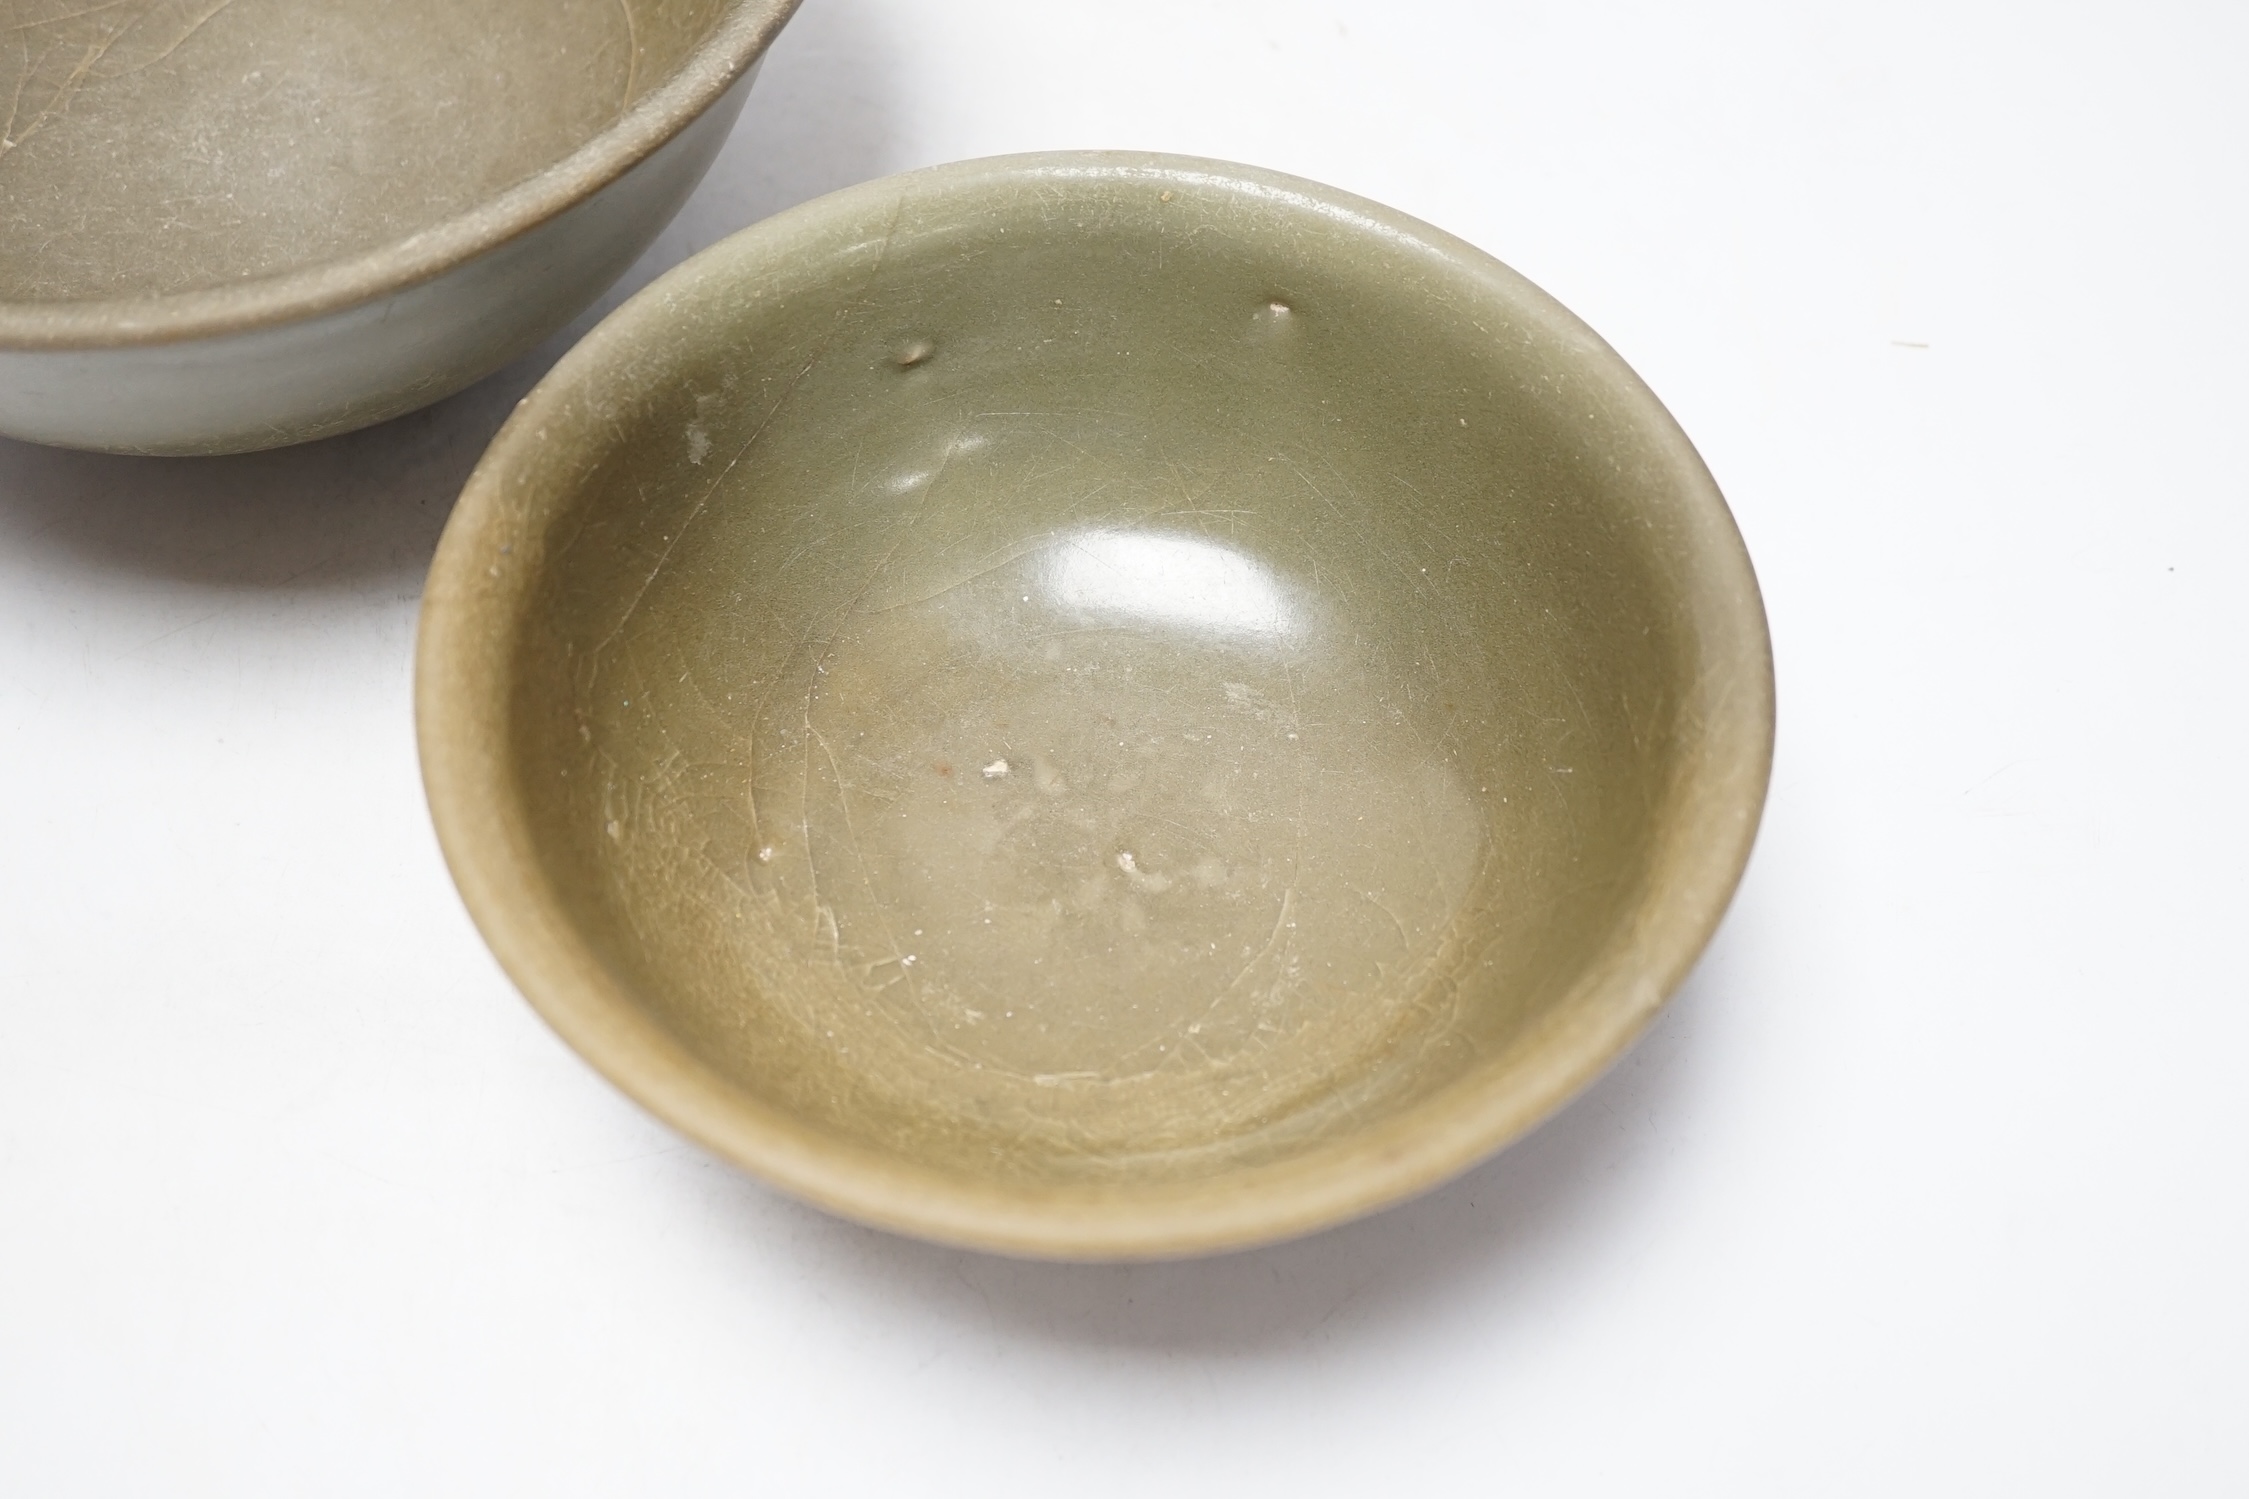 Two Chinese celadon bowls, Yuan-Ming dynasty, largest 22.5cm diameter - Image 5 of 6